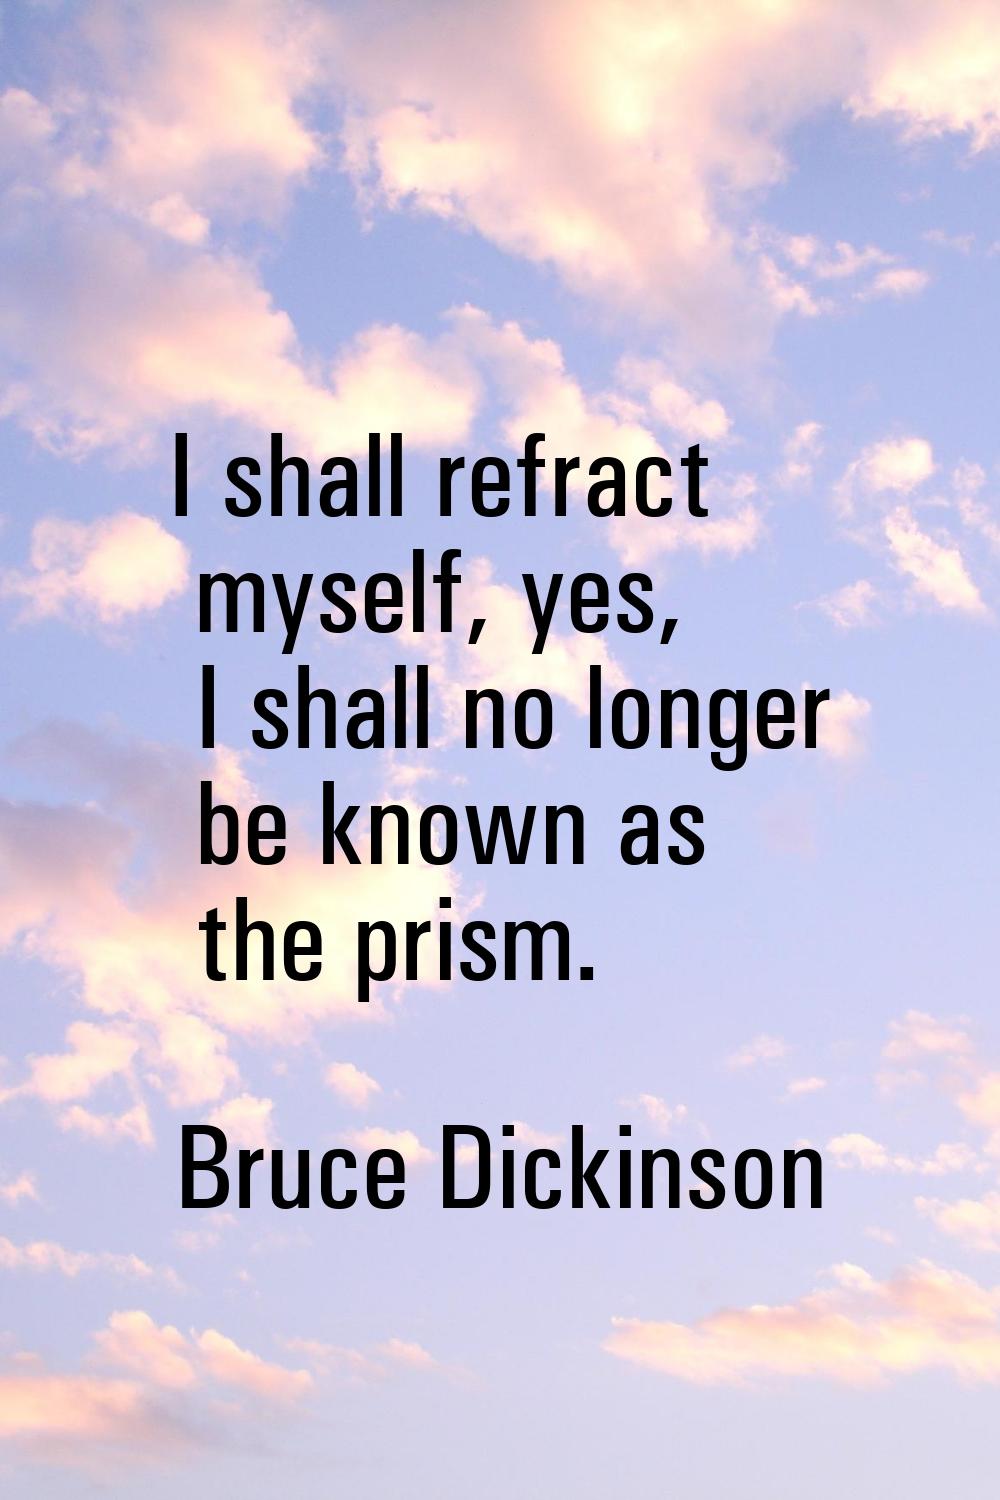 I shall refract myself, yes, I shall no longer be known as the prism.